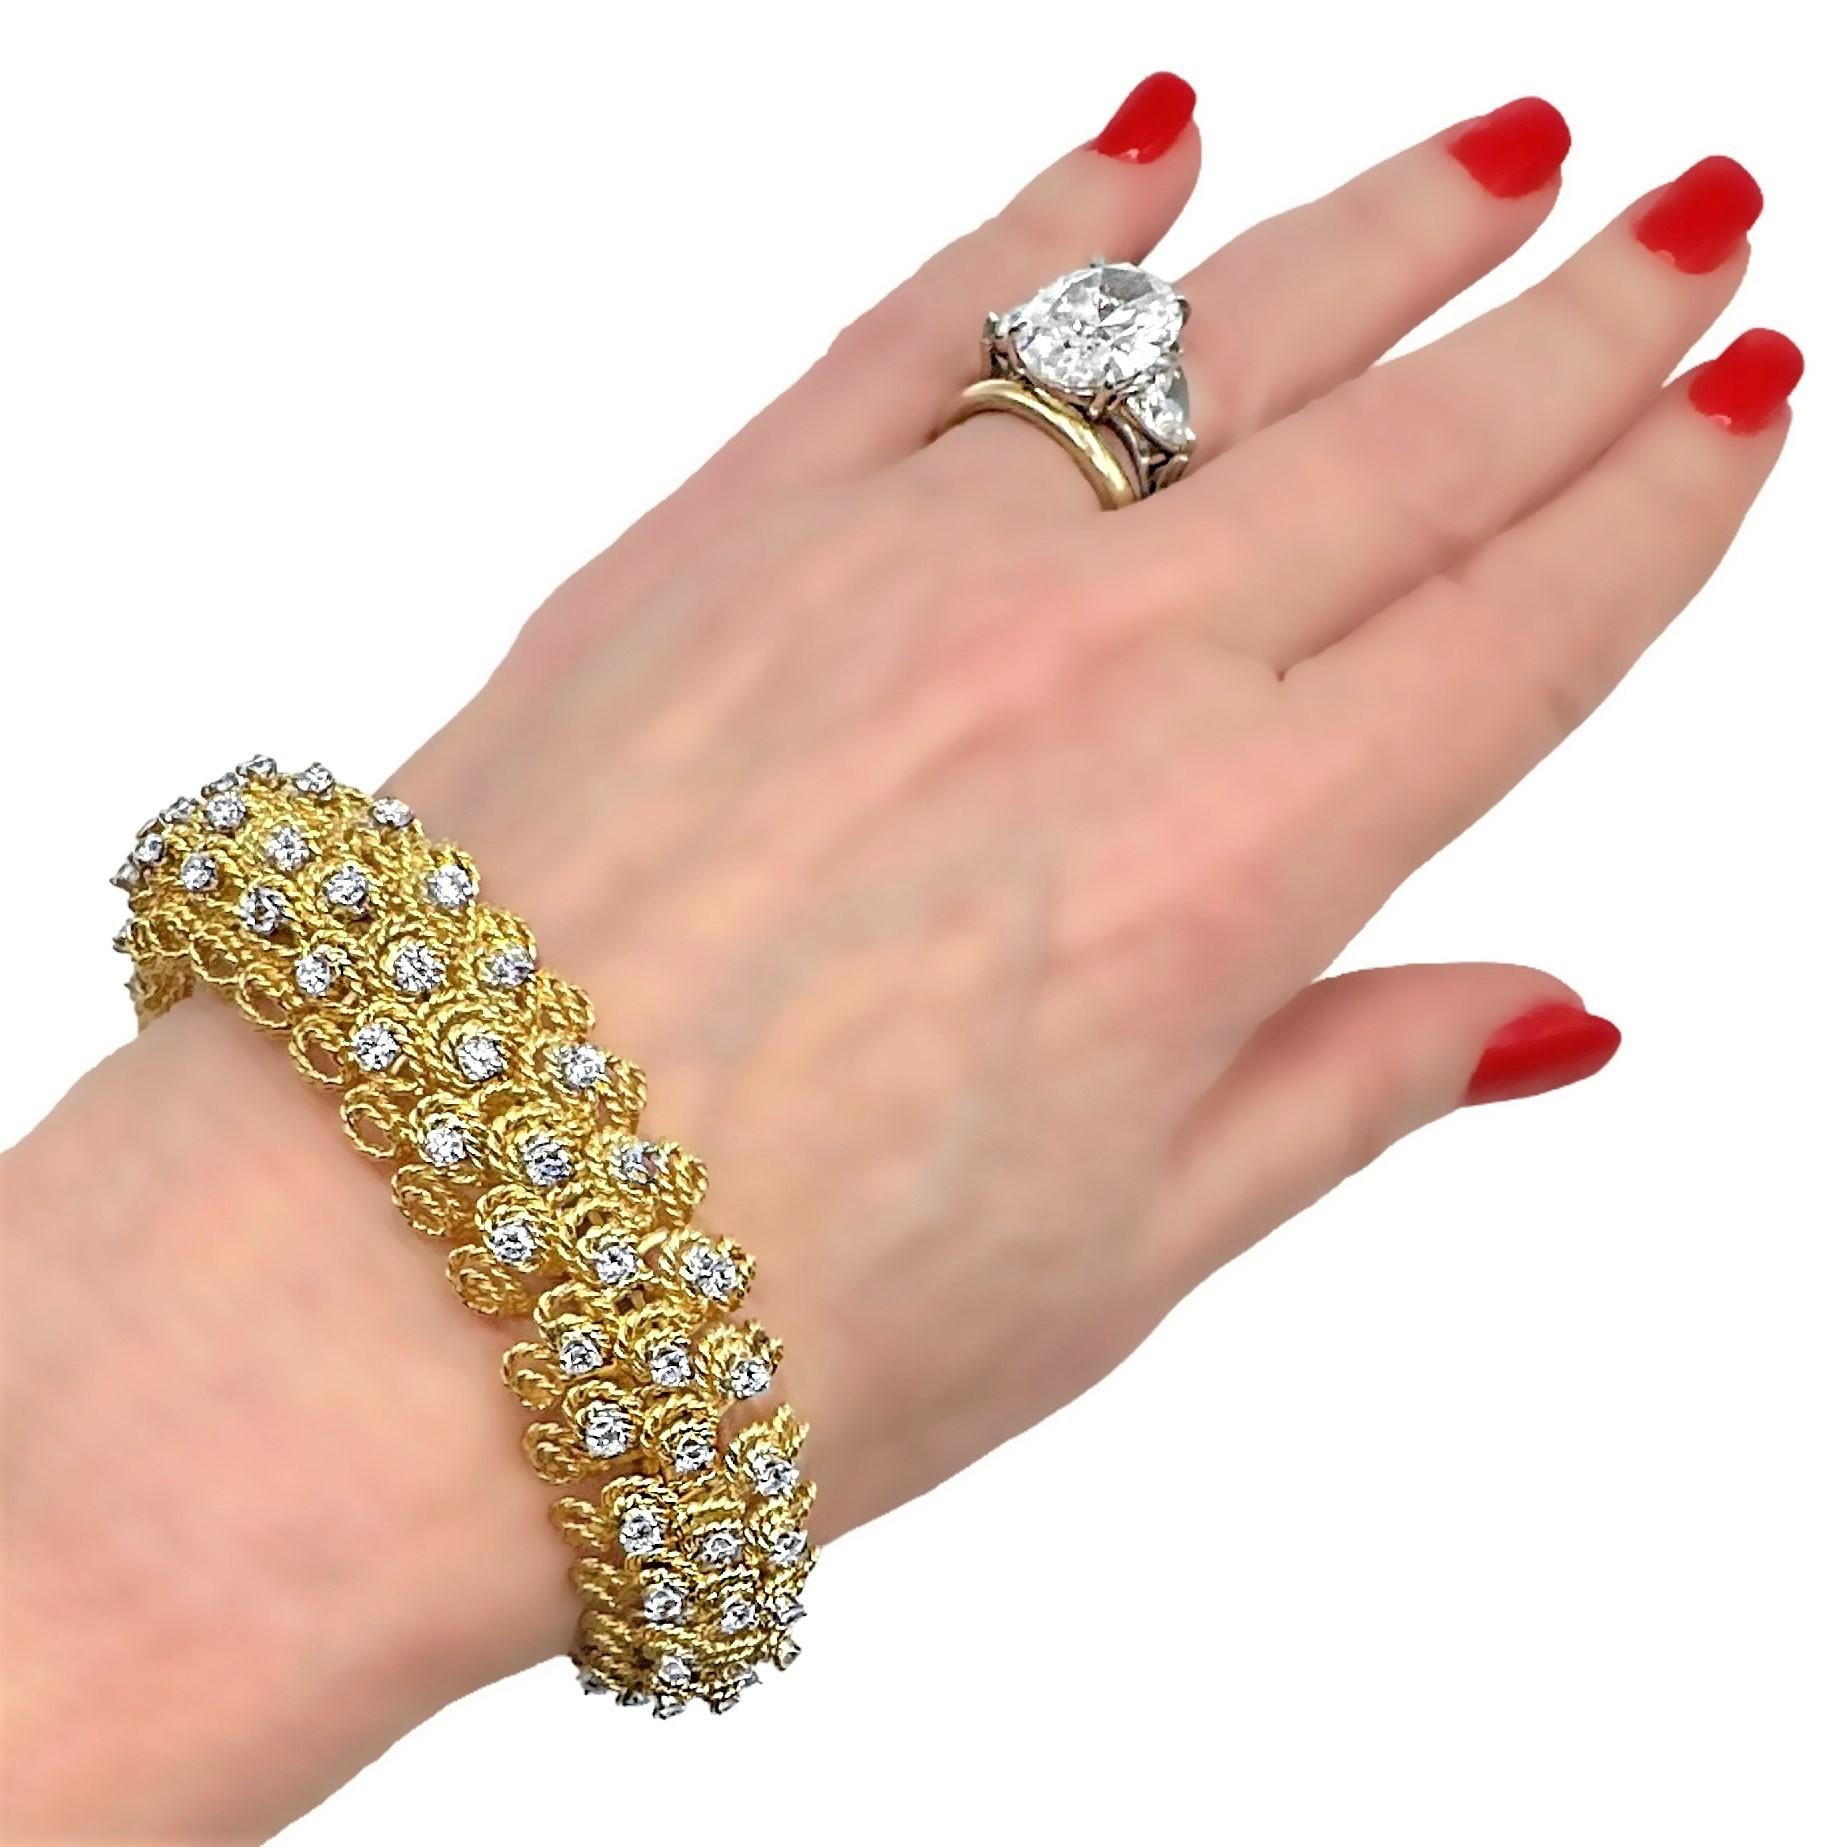 Women's Bold American 1960's 18K Yellow Gold Cocktail Bracelet with 3 Rows of Diamonds